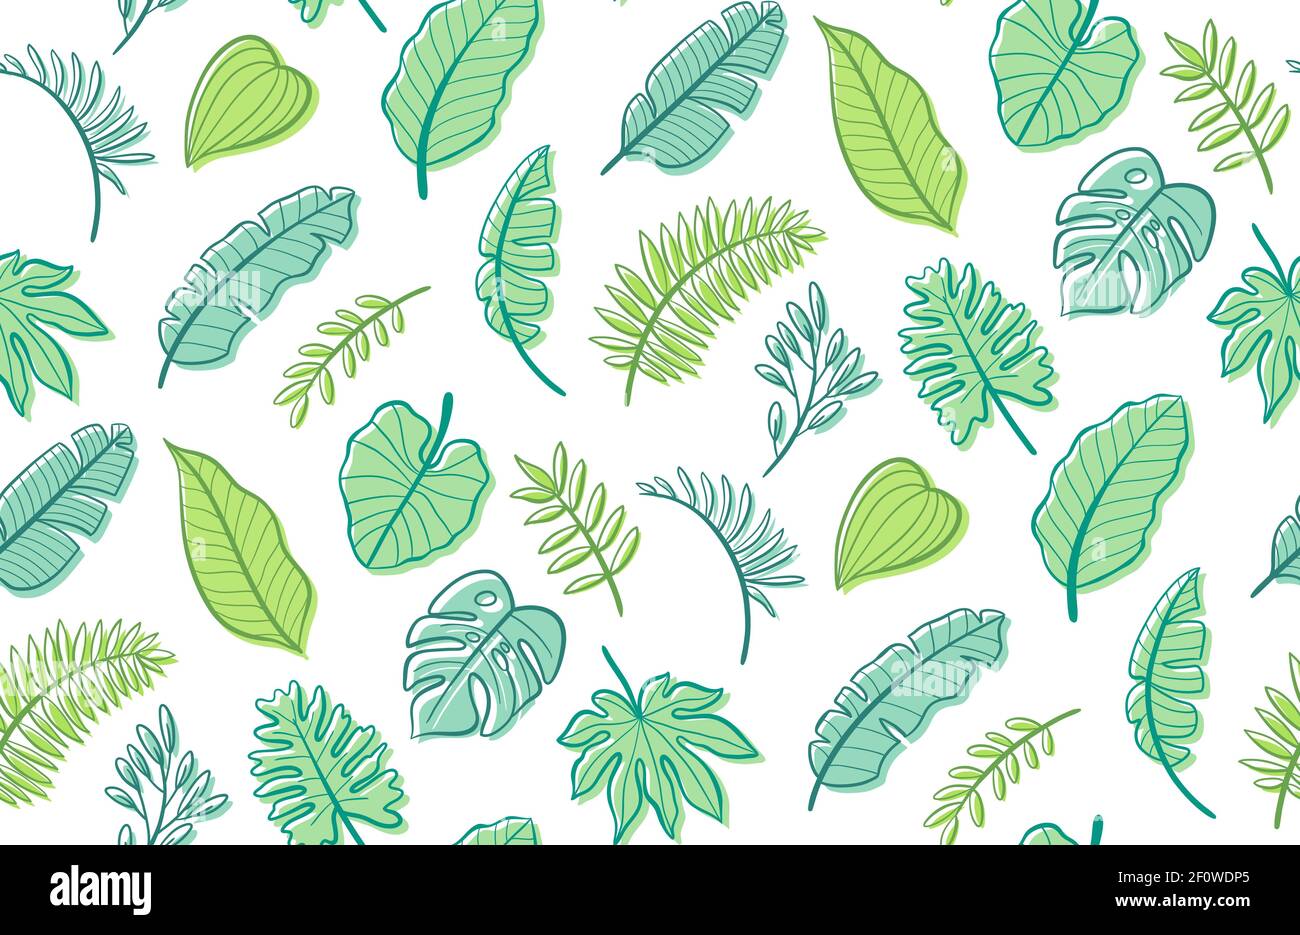 Hand drawn tropical seamless pattern with green leaves. Vector illustration. Stock Vector